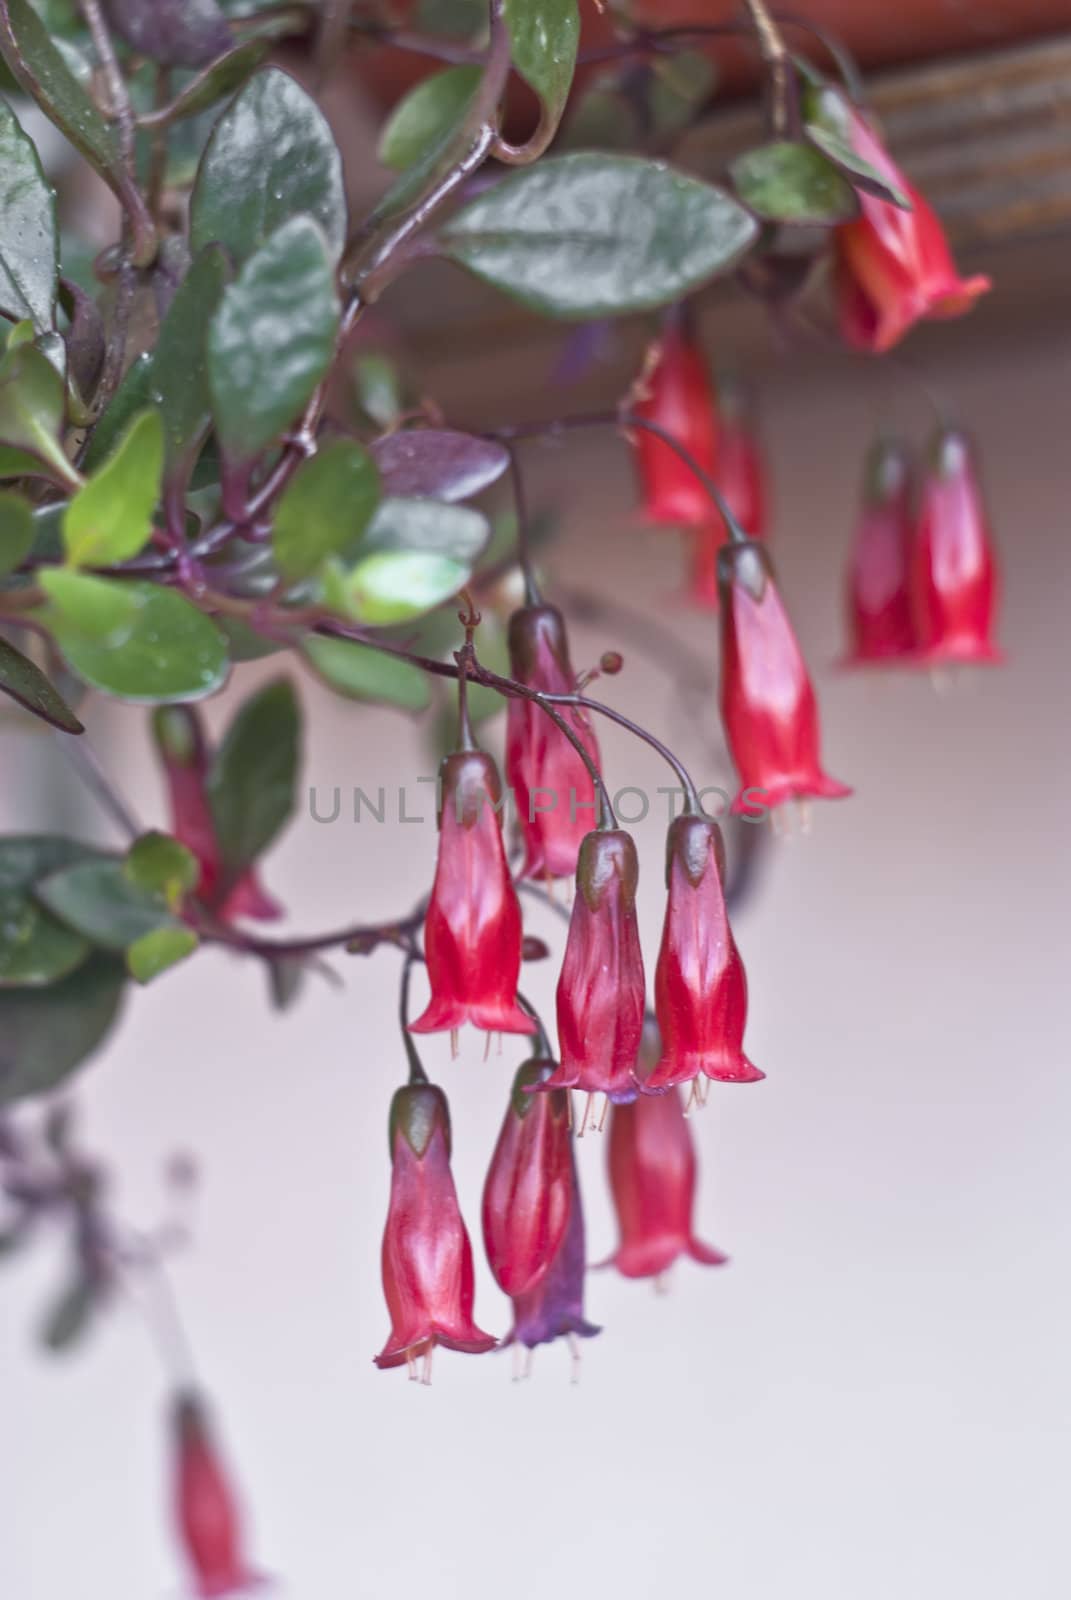 A red fuchsia blossoming outdoors.